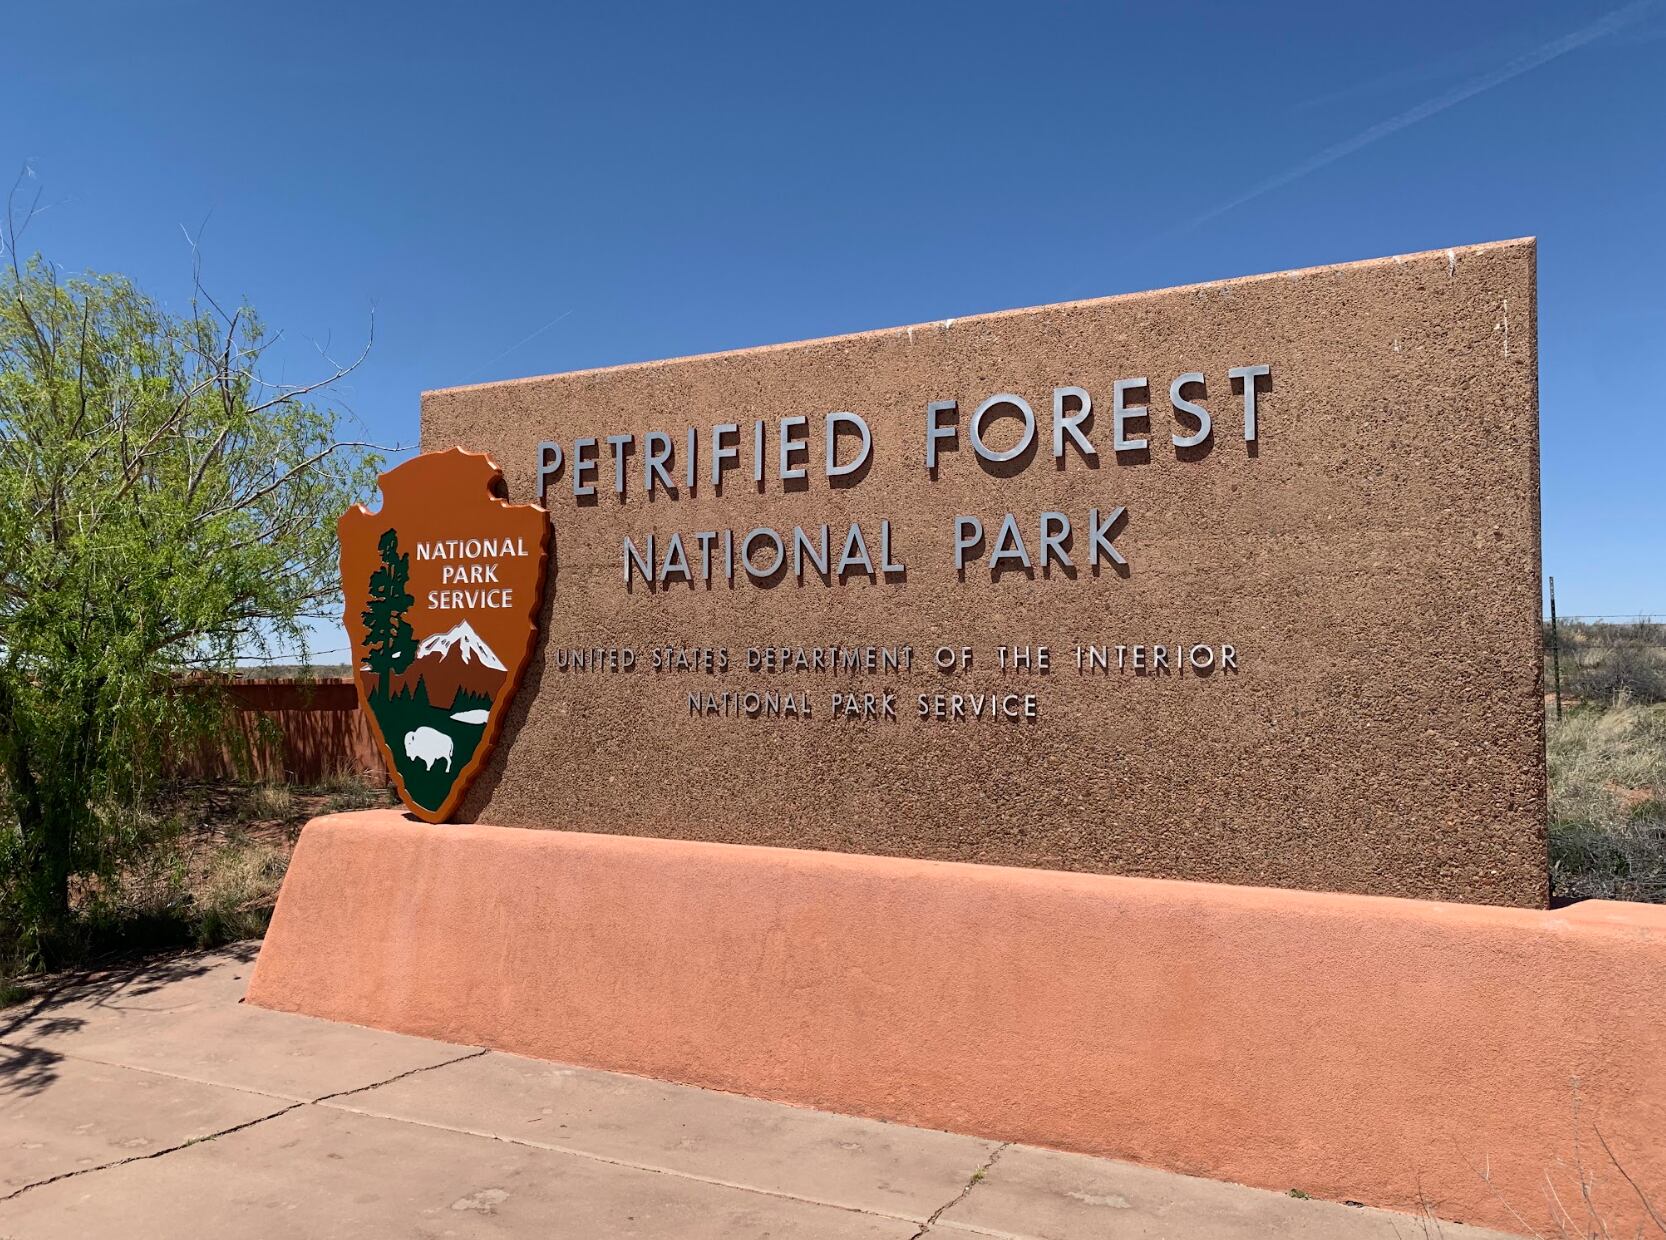 Slocum and crew visit the Petrified Forest National Park National Park.